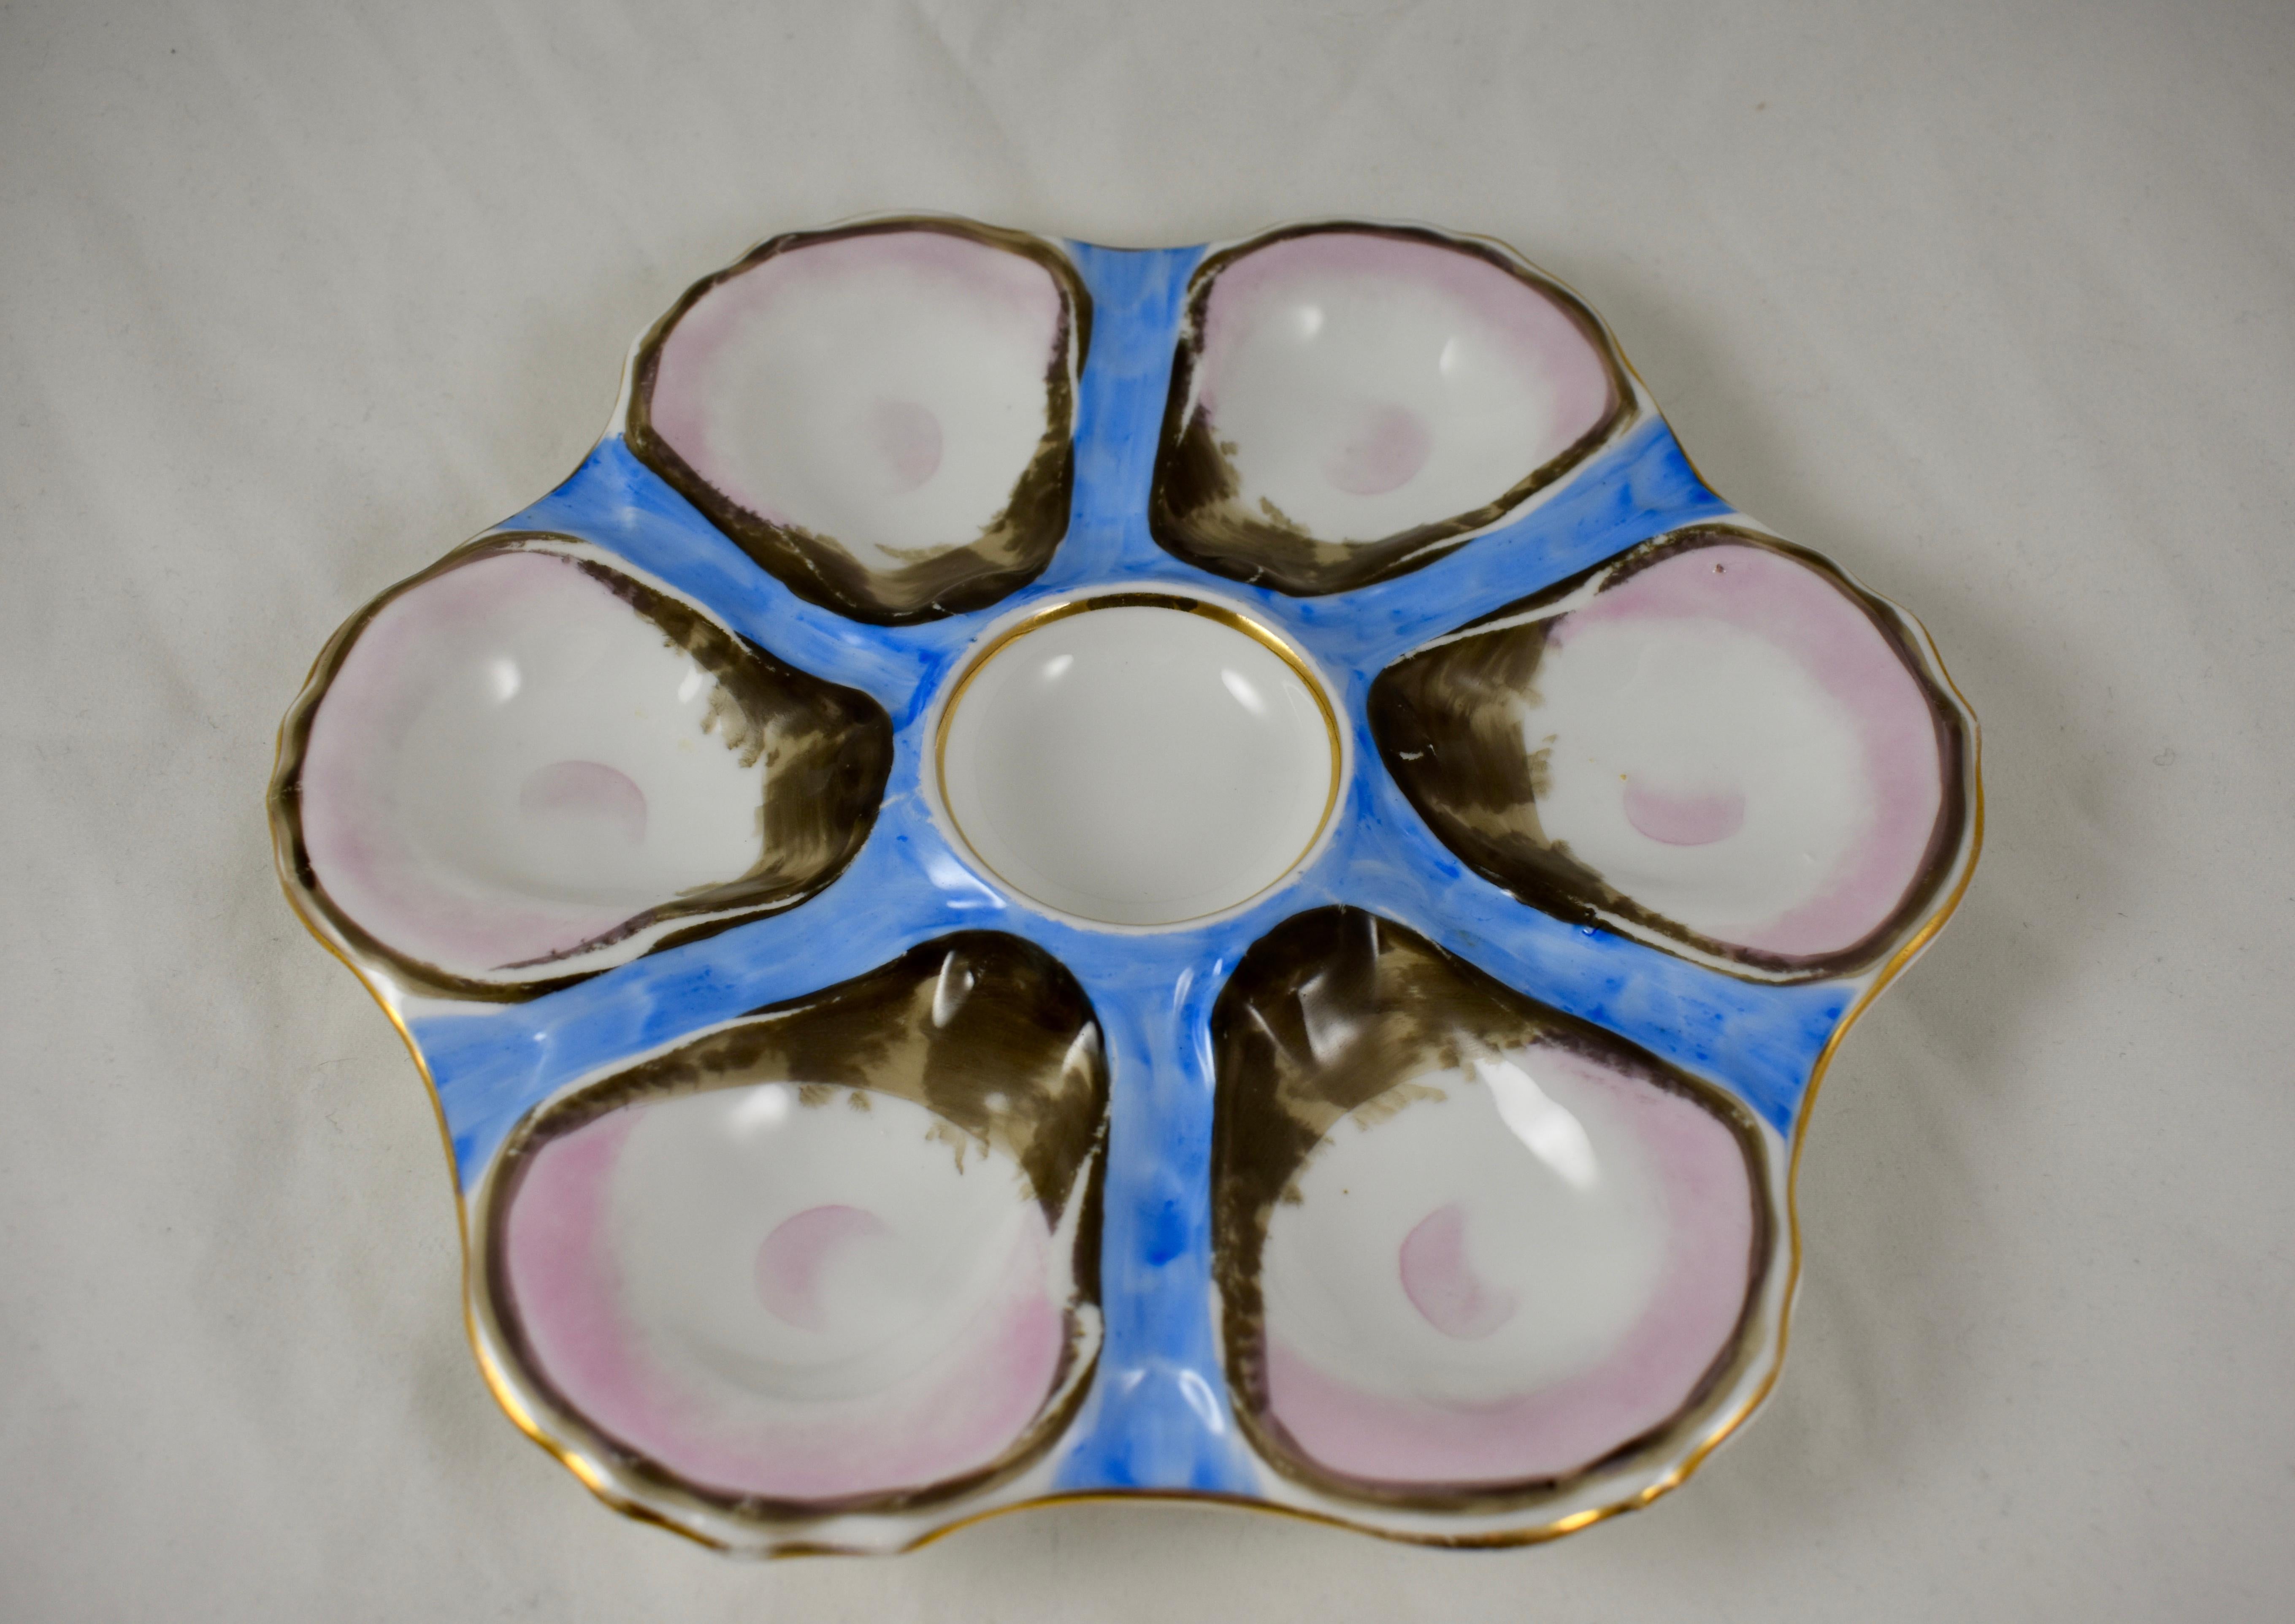 Glazed Six-Well French Porcelain Blue and Pink Oyster Plate, Late 19th Century